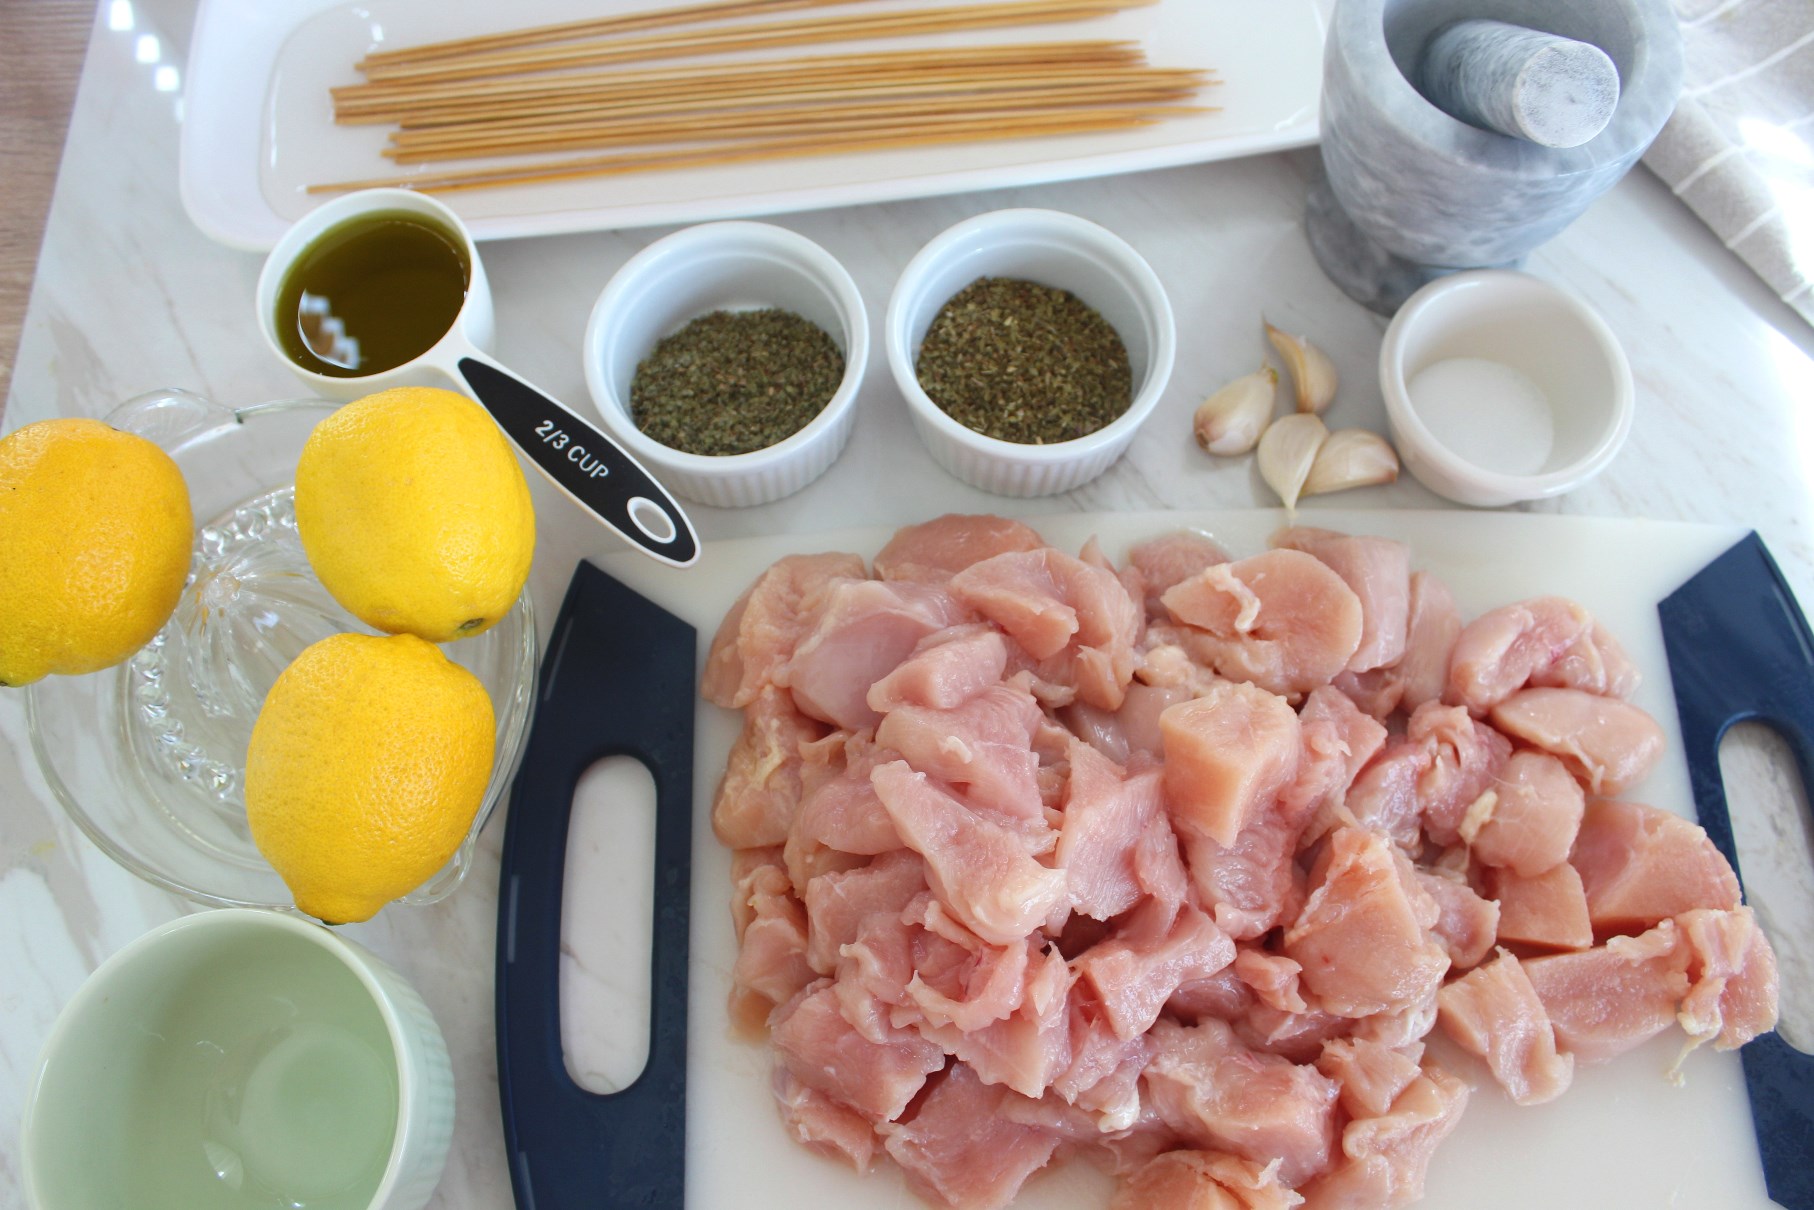 All the ingredients together on a flat surface for the chicken kabobs. You see herbs, lemons, cut chicken, a mortar and pestle, oil and skewers in water. 